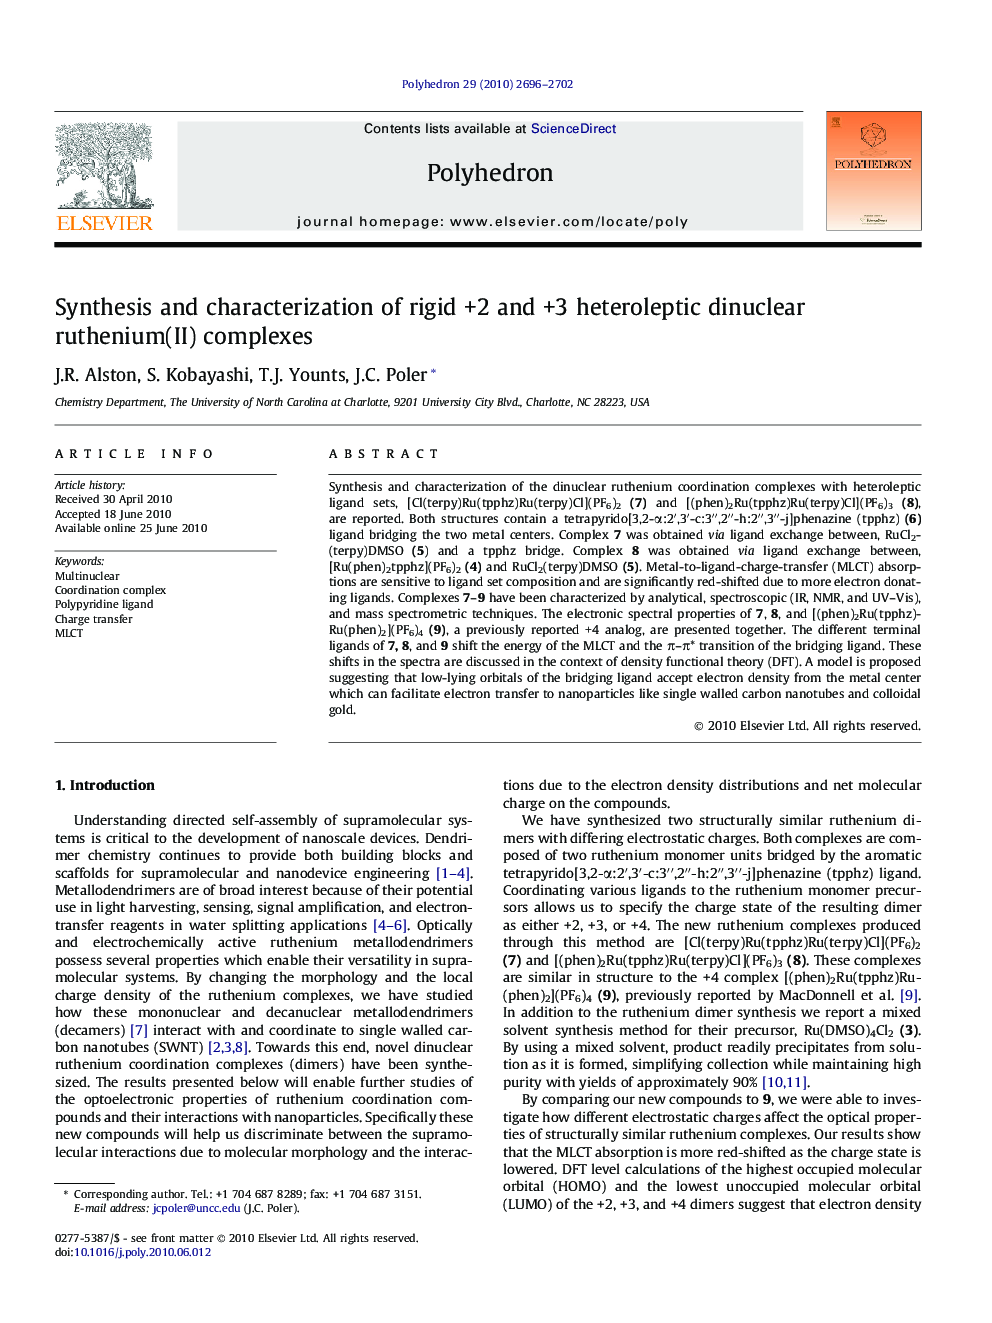 Synthesis and characterization of rigid +2 and +3 heteroleptic dinuclear ruthenium(II) complexes